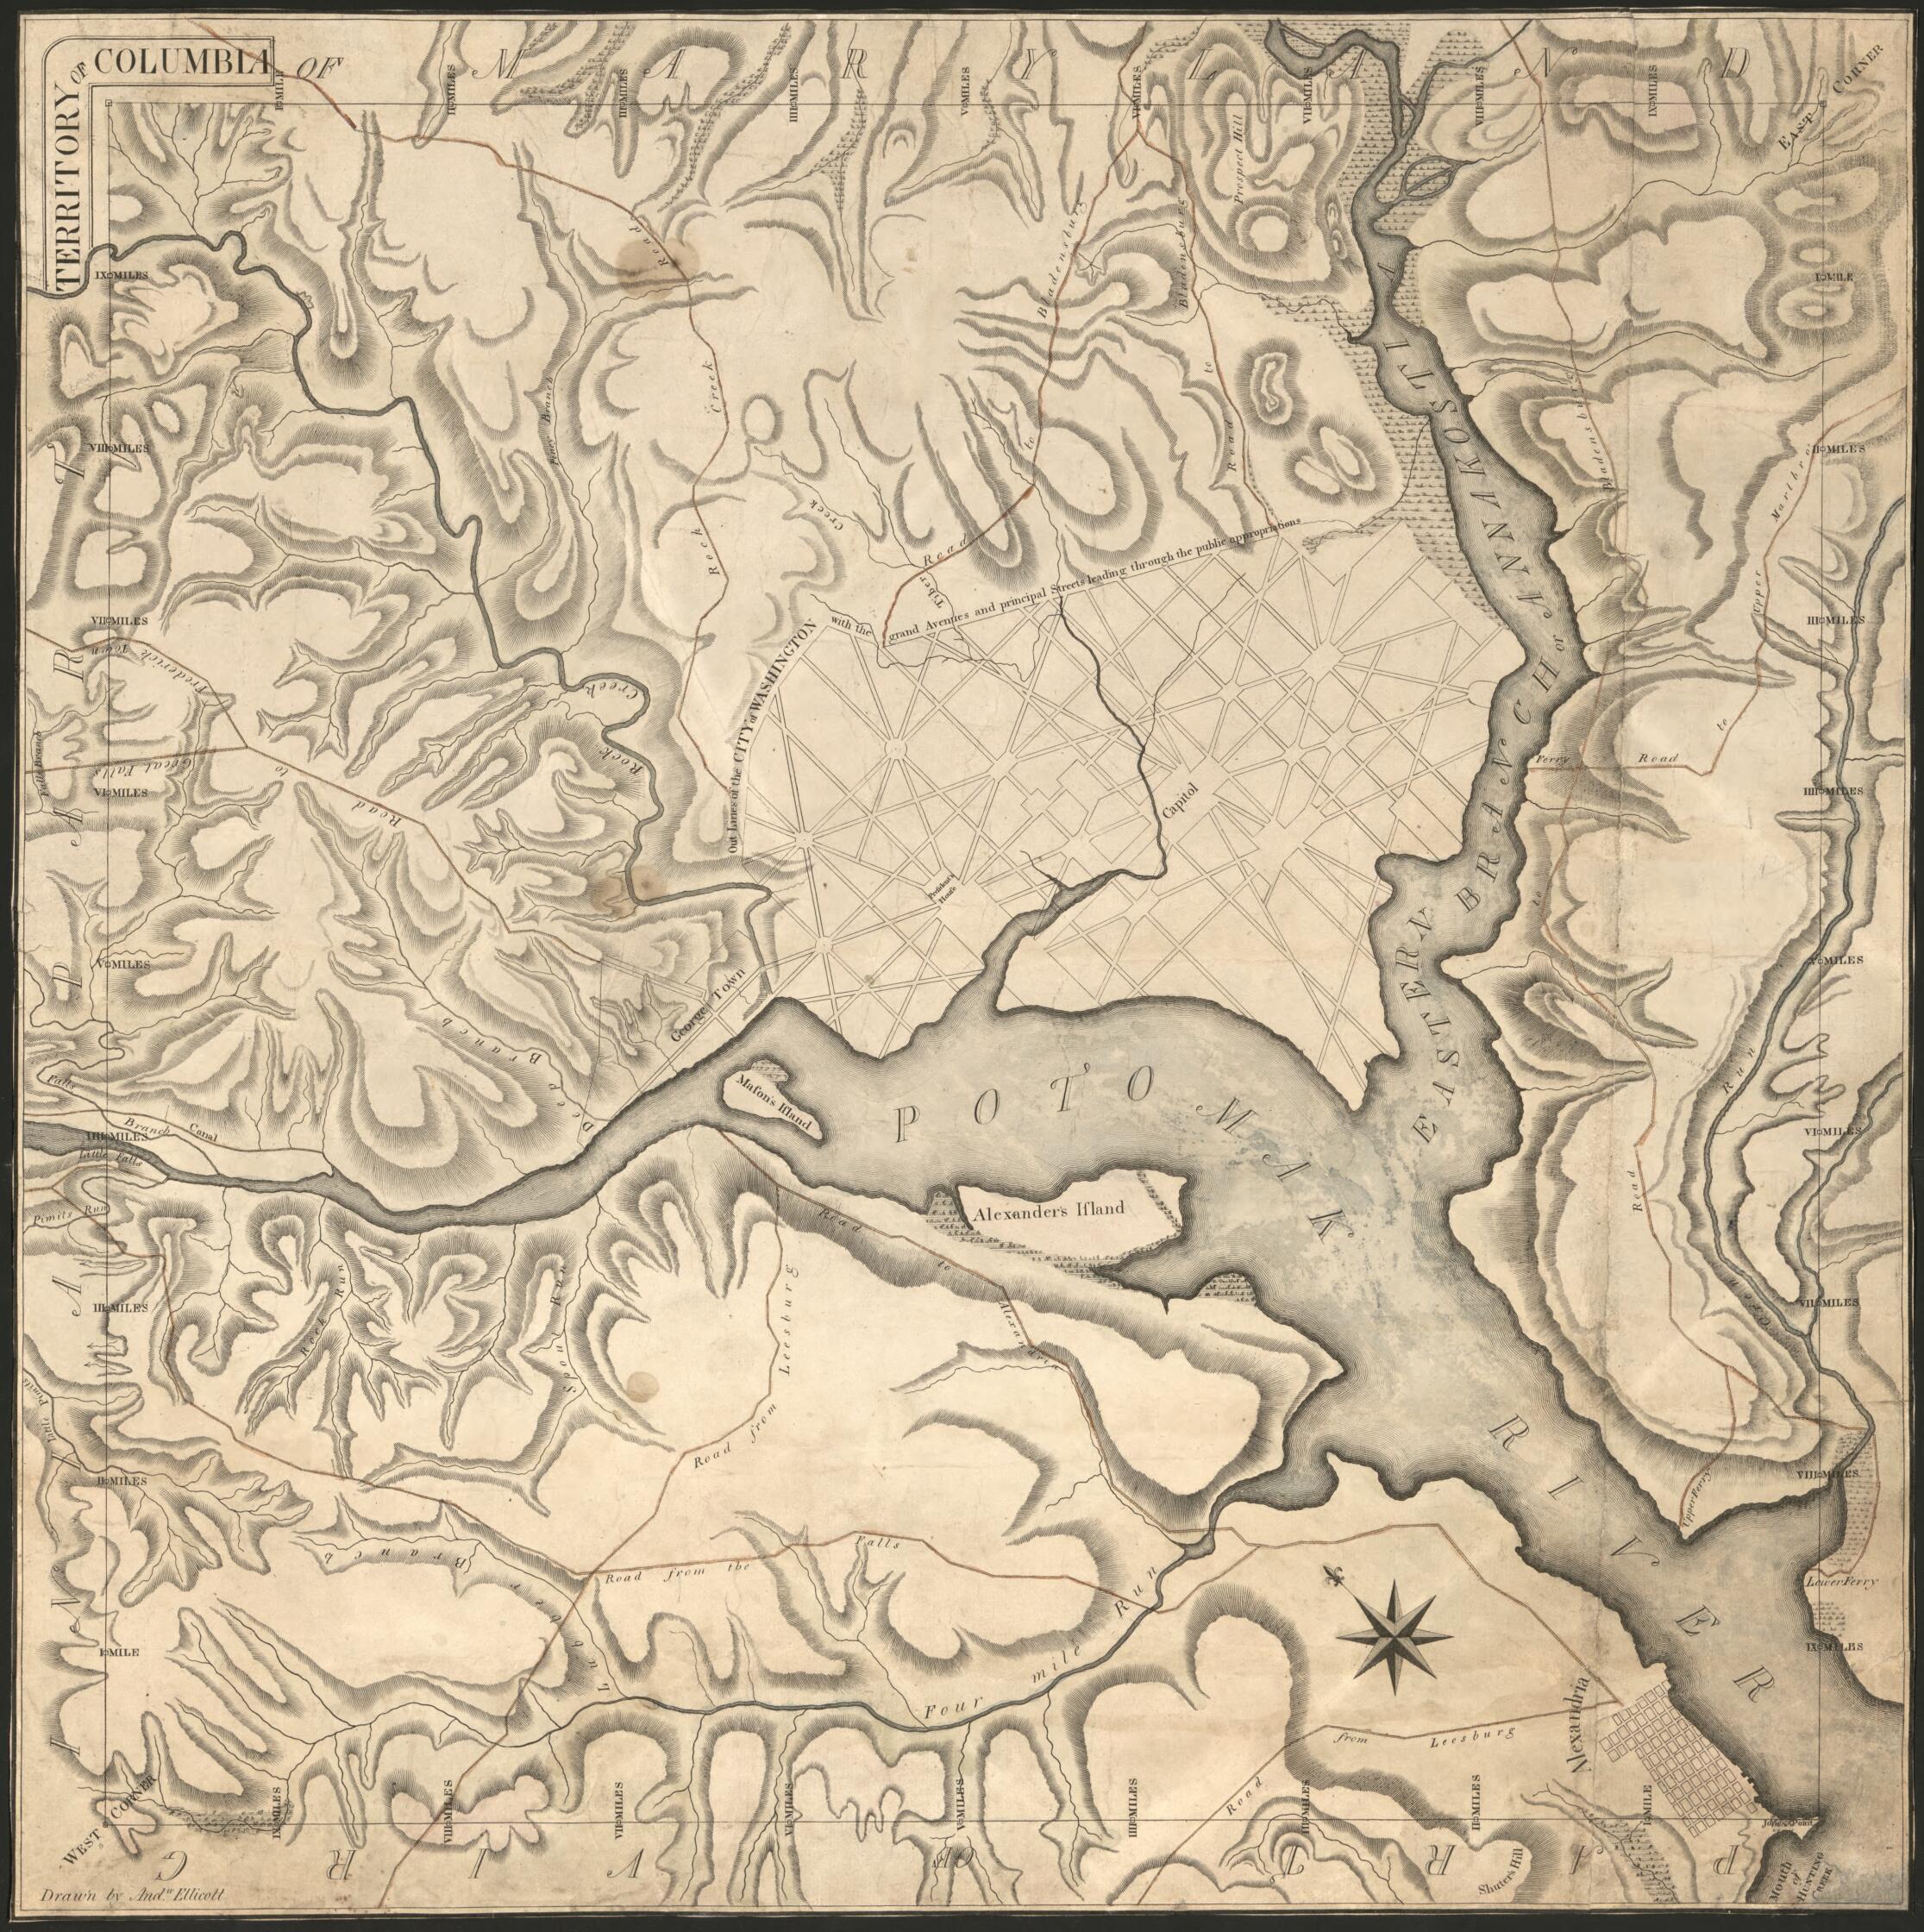 This old map of Territory of Columbia from 1794 was created by Andrew Ellicott in 1794